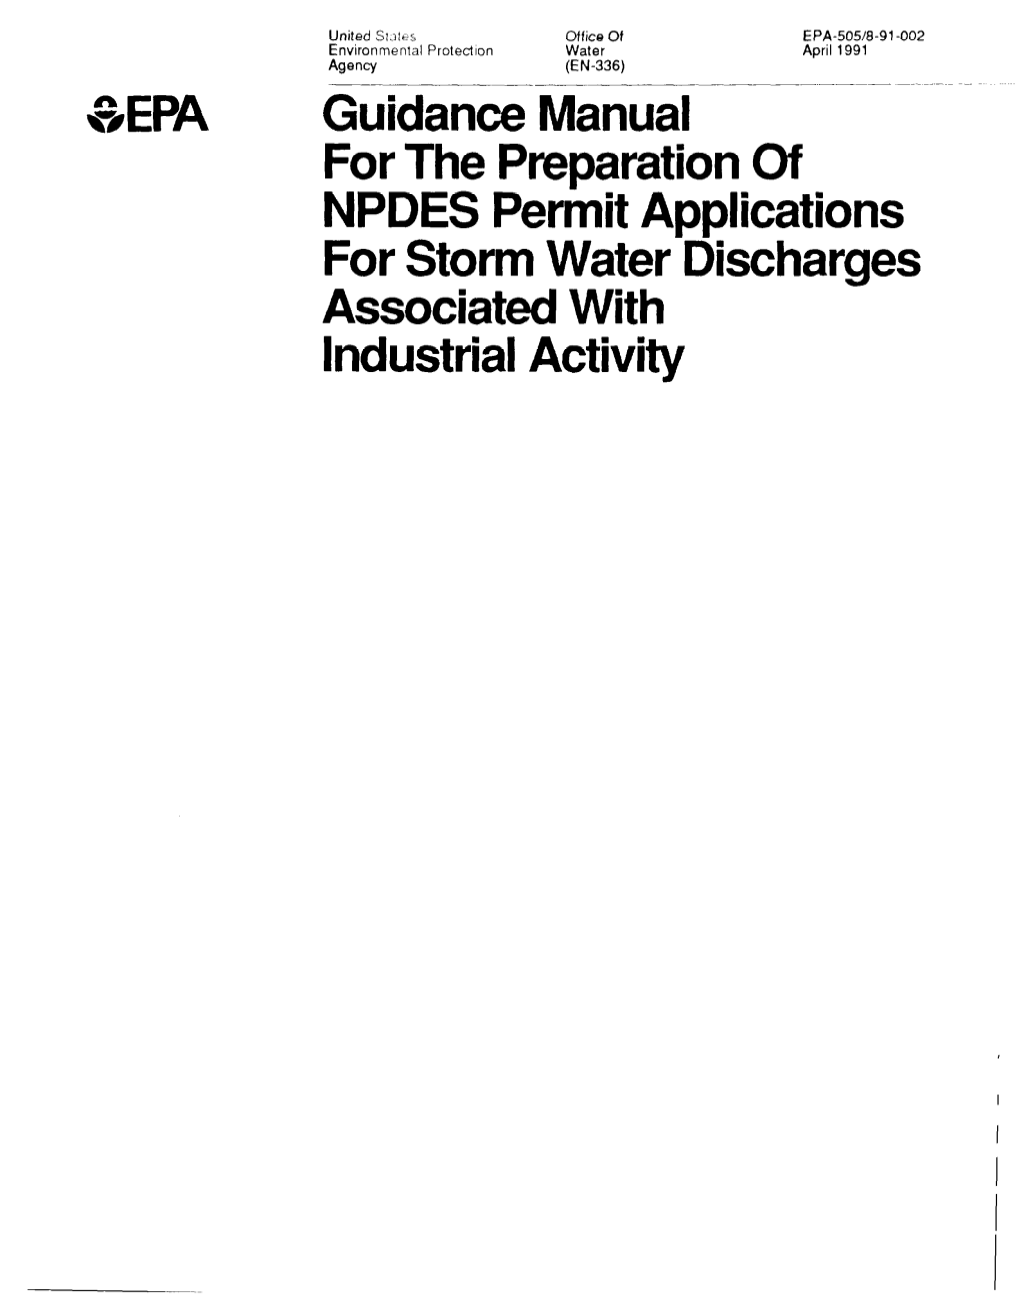 Guidance Manual for the Preparation of National Pollutant Discharge Elimination System (NPDES) Permits Applications for Storm W